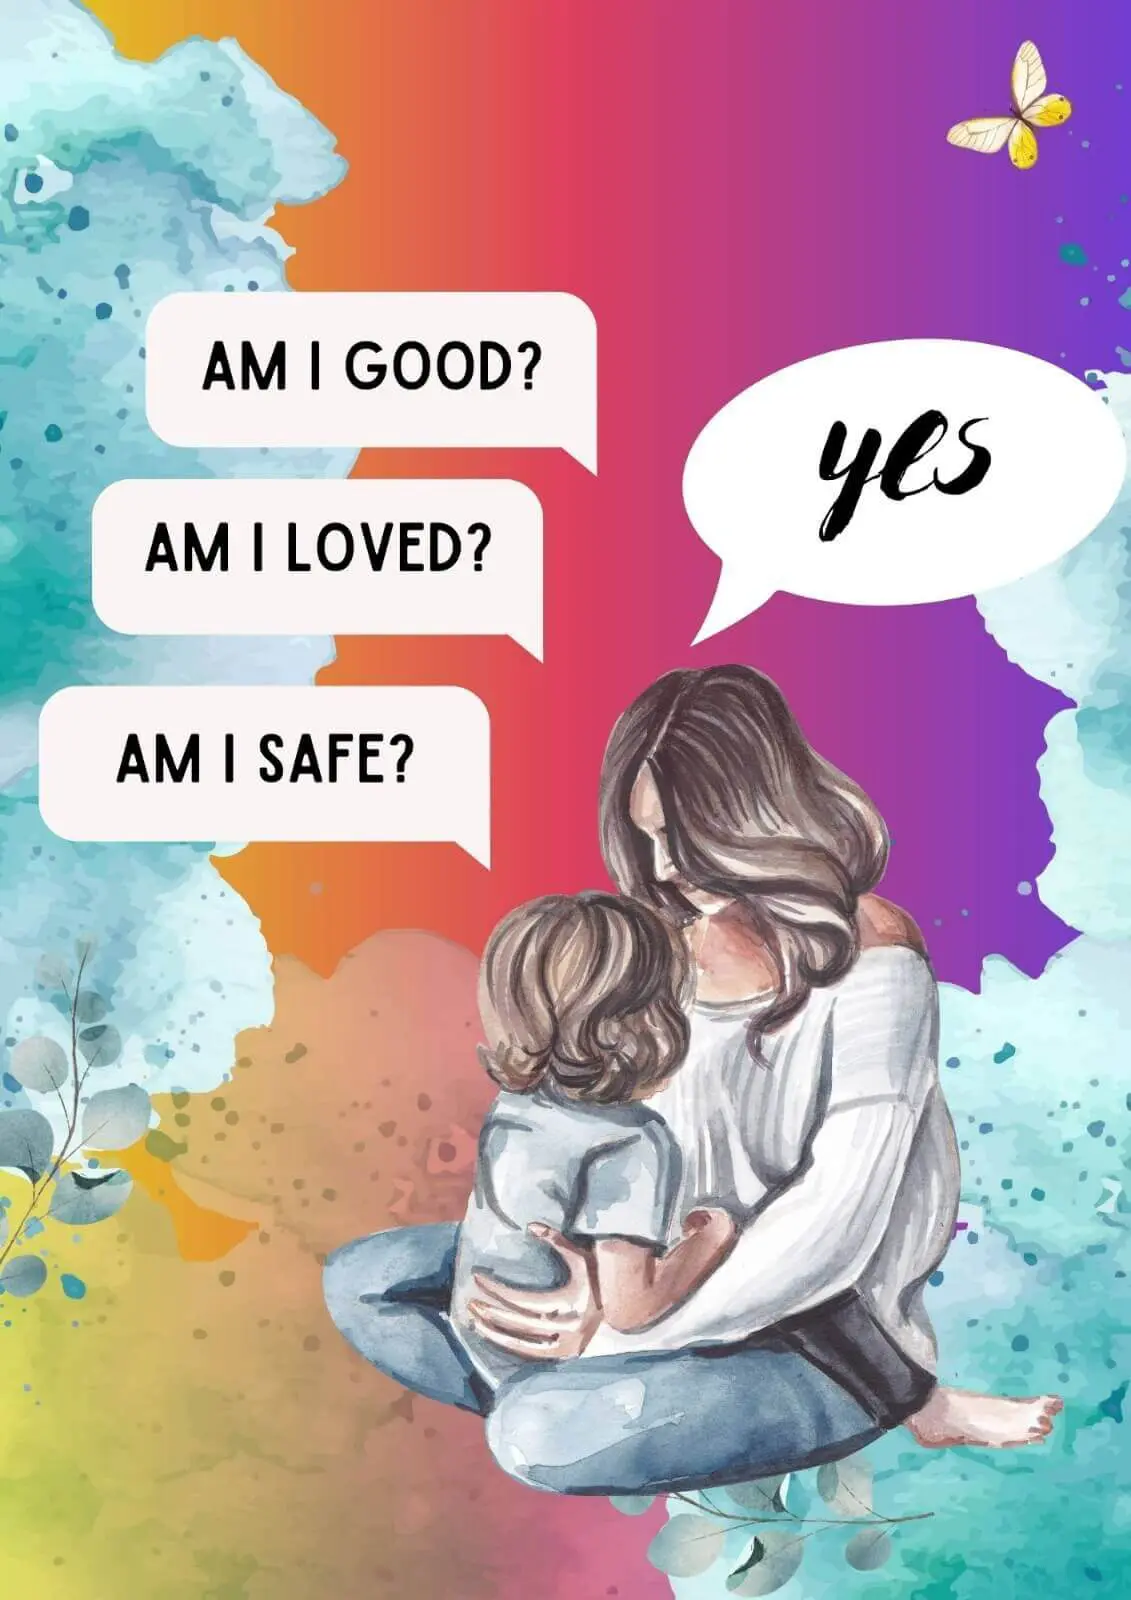 I am good, loved and safe image for growth stories